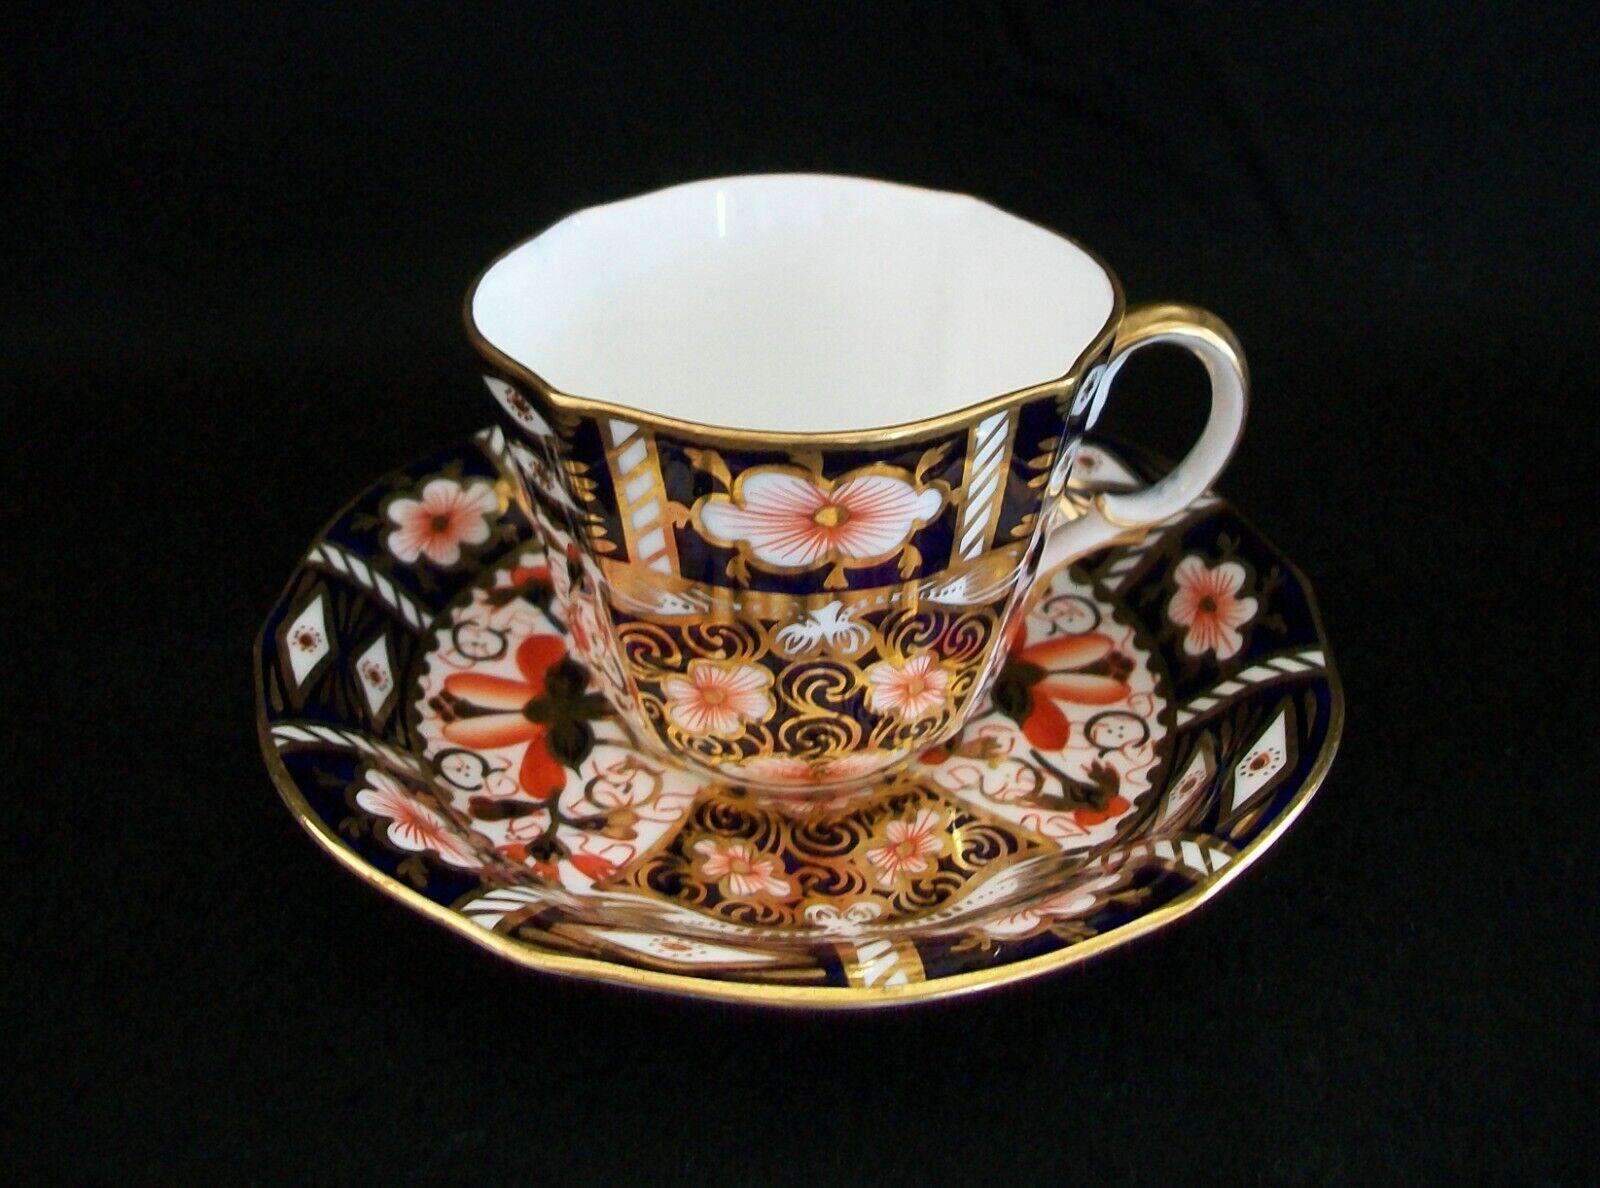 ROYAL CROWN DERBY - Imari Pattern Number 2451 - Antique bone china tea cup with fluted sides (circa 1912) and an antique saucer (circa 1916) - elaborate gilt decoration over blue and orange hand painted oriental pattern - each signed on the